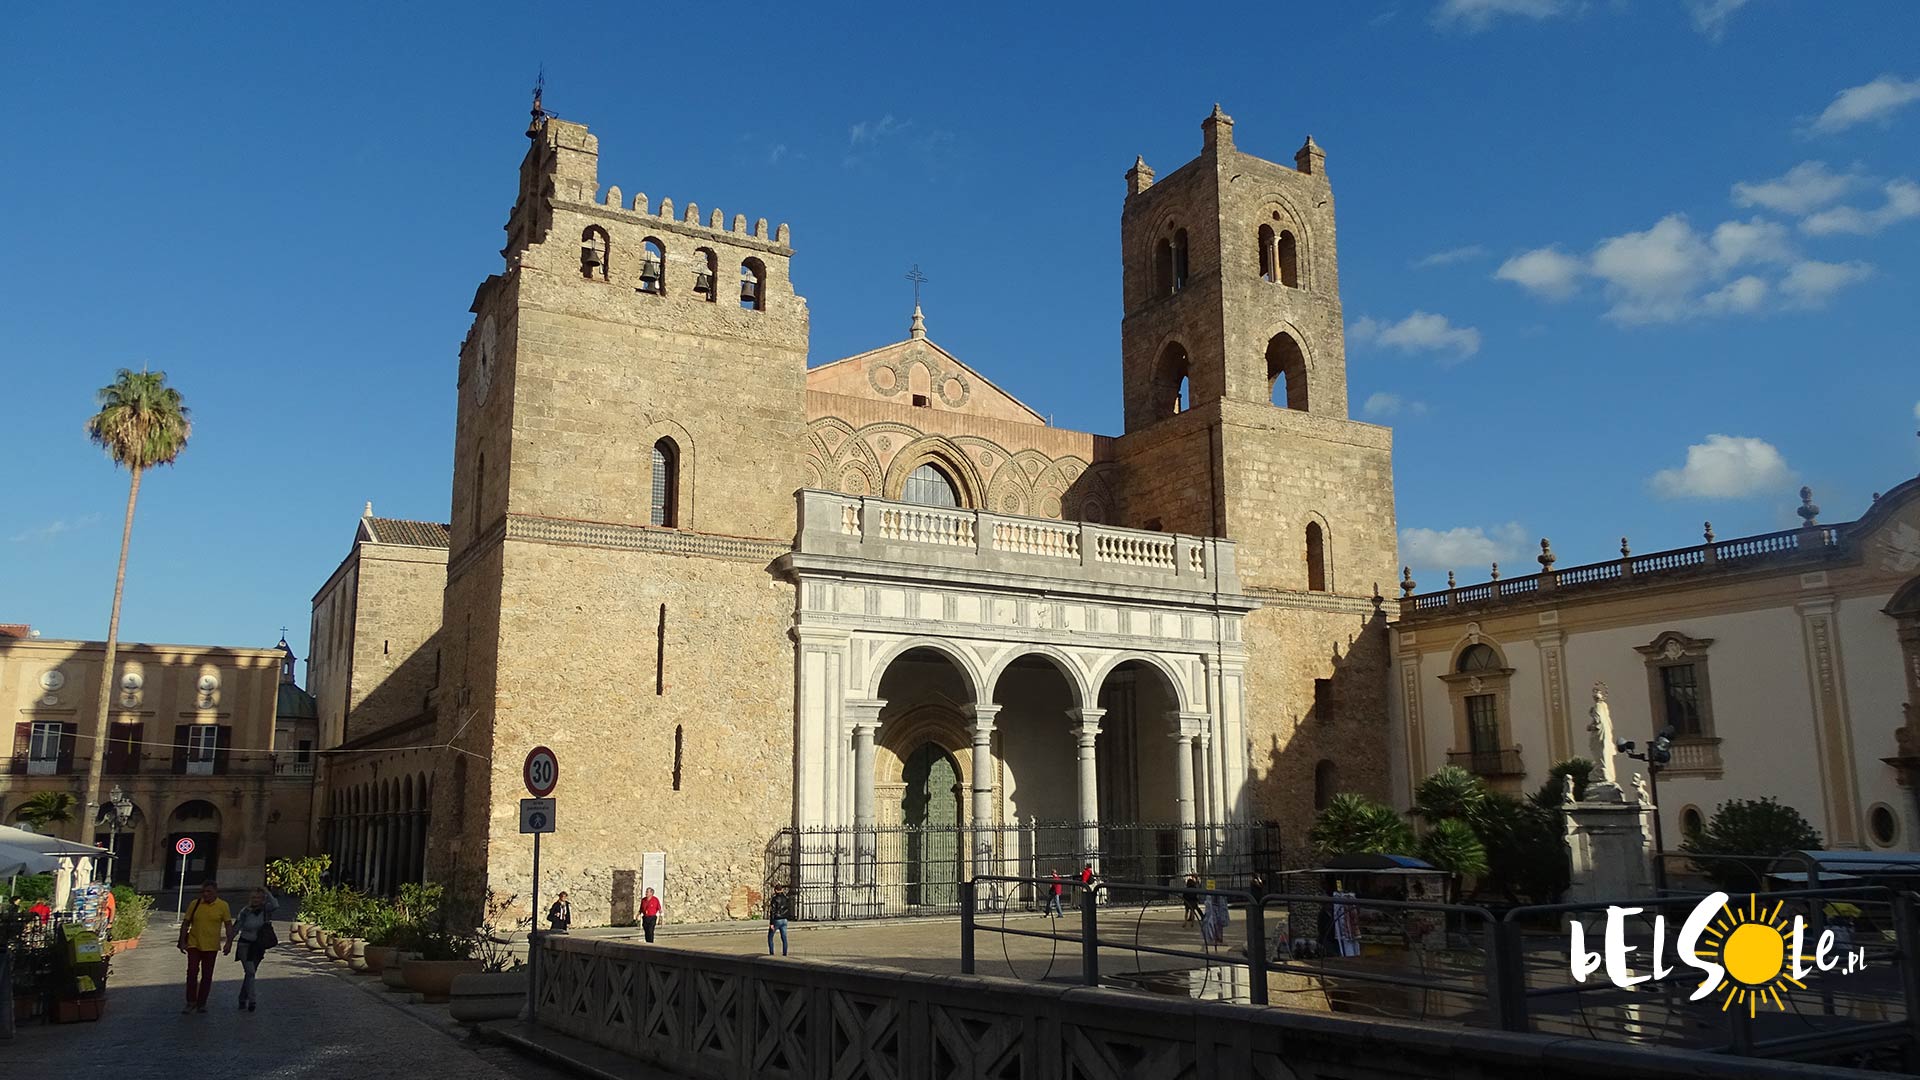 Monreale Cathedral